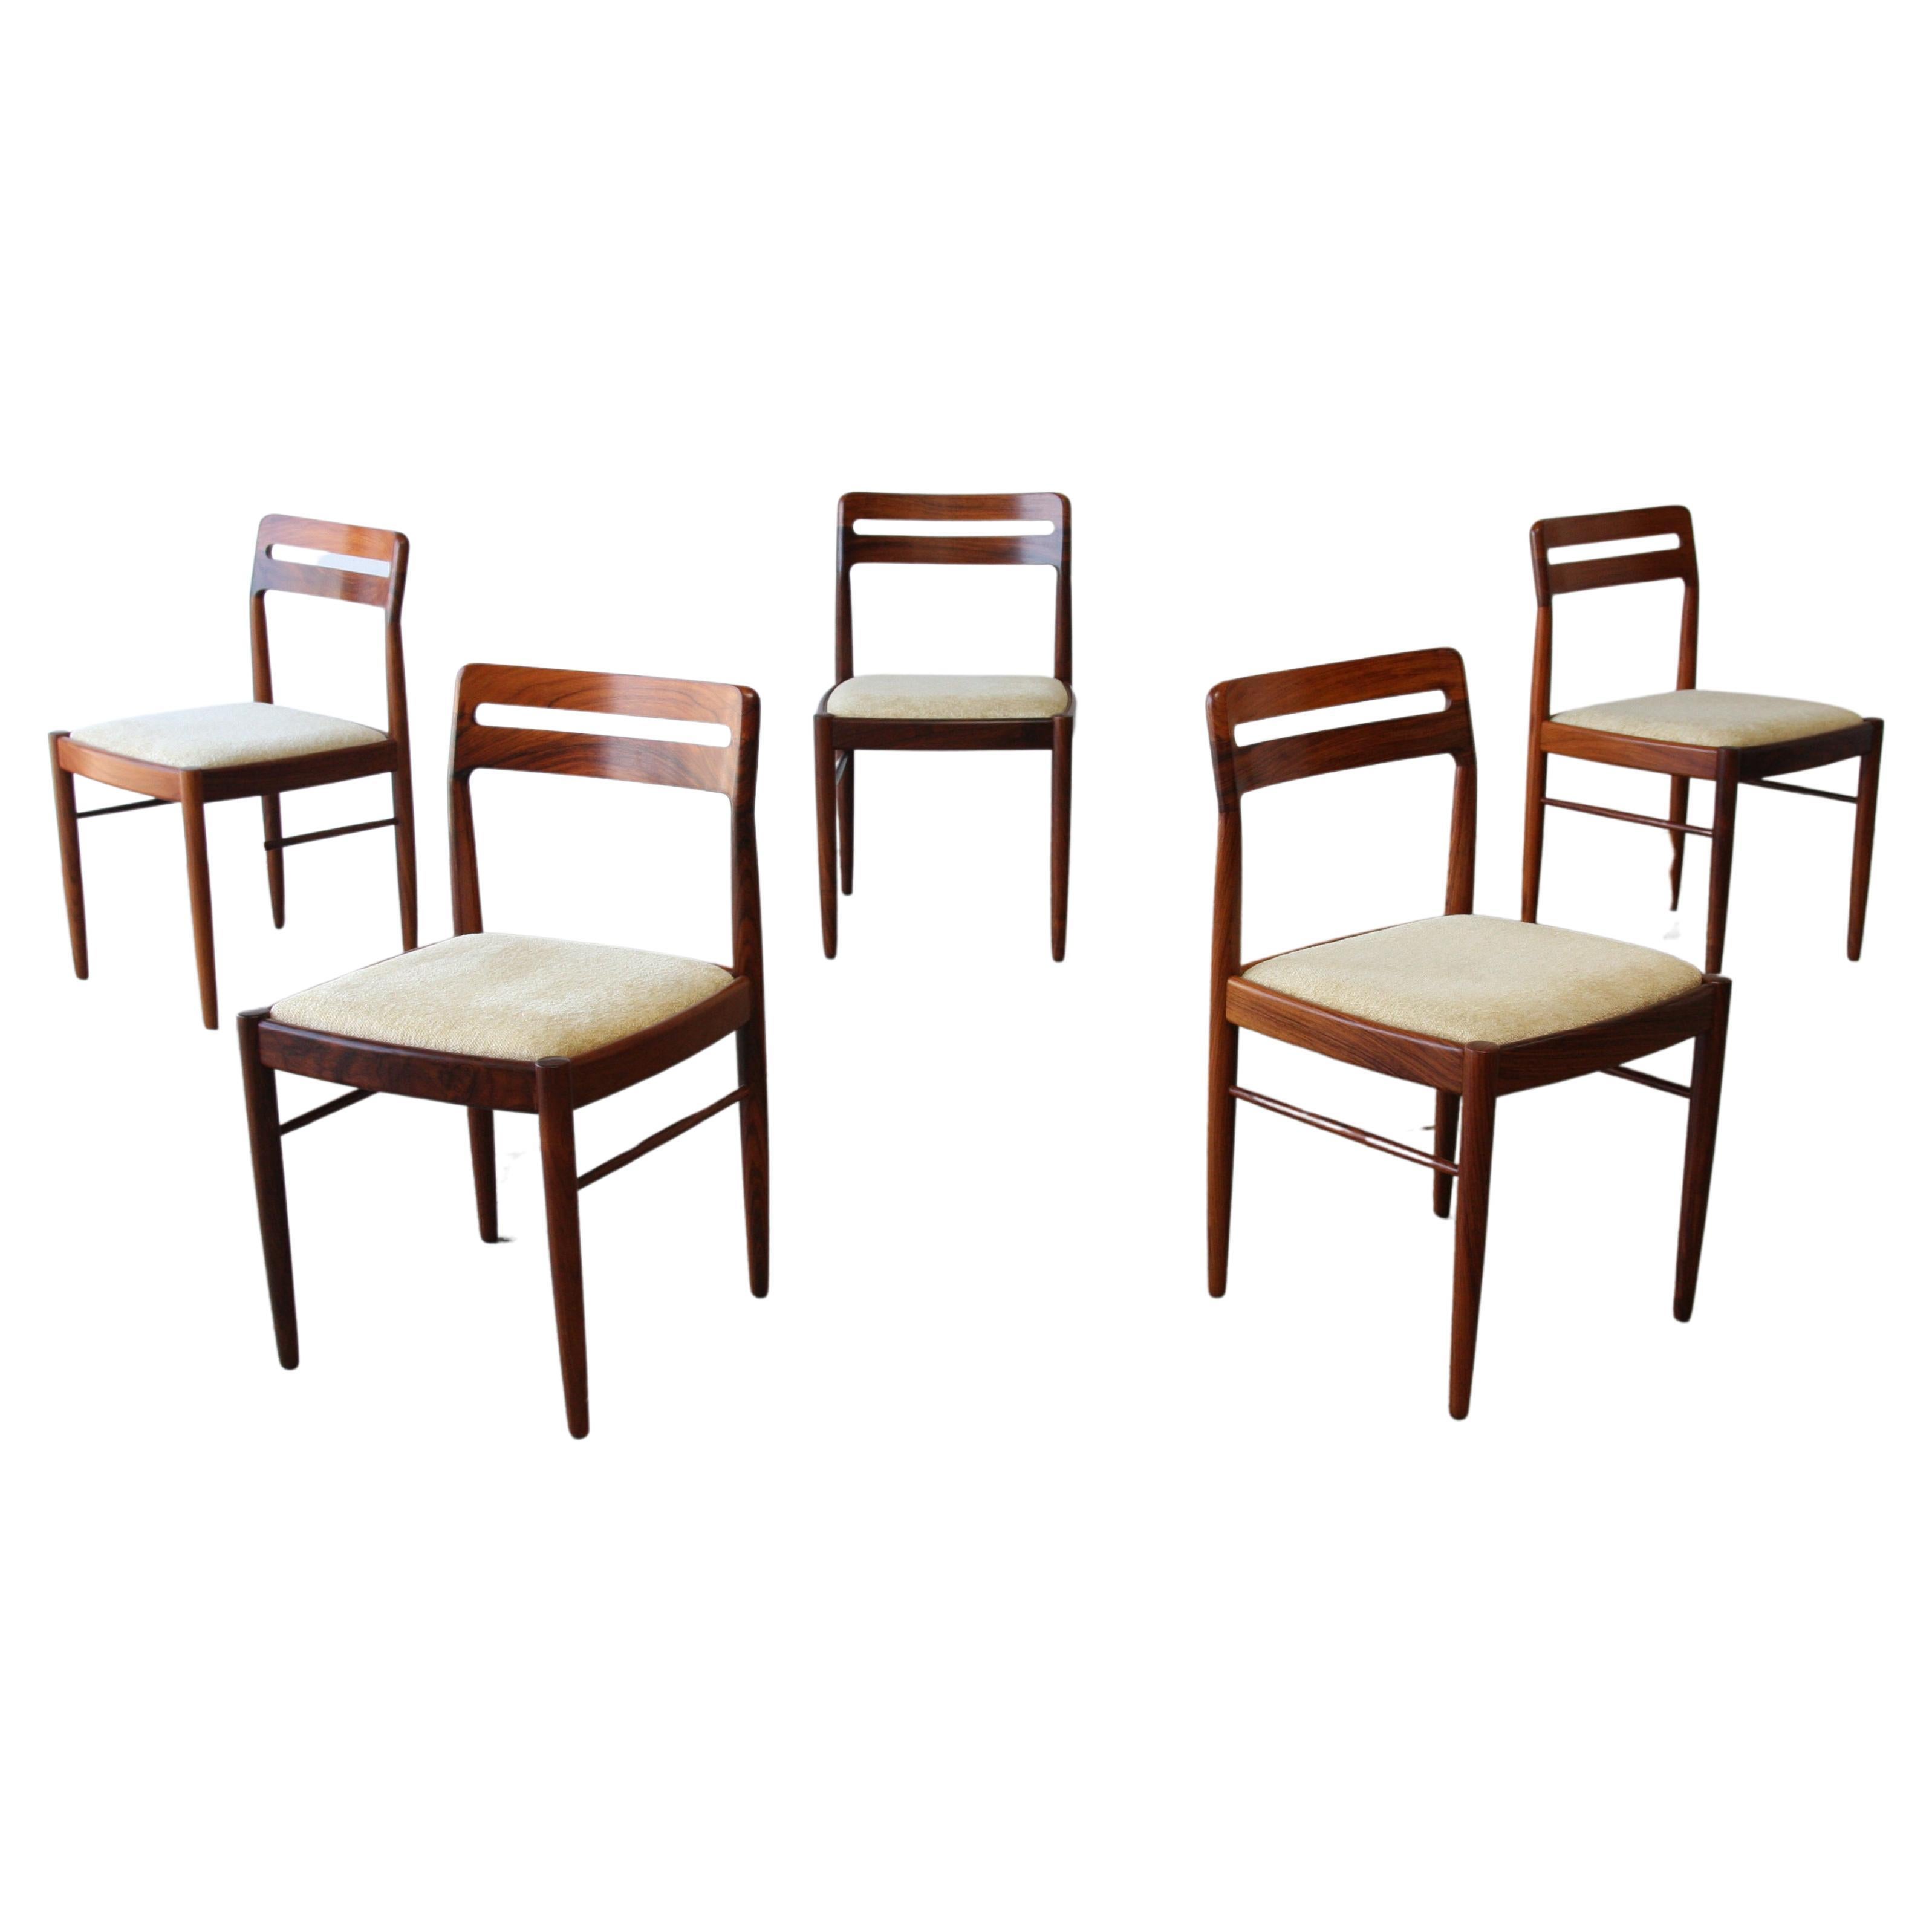 Set of 4 +1 (5) Danish Modern Rosewood Dining Chairs by H.W. Klein for Bramin For Sale